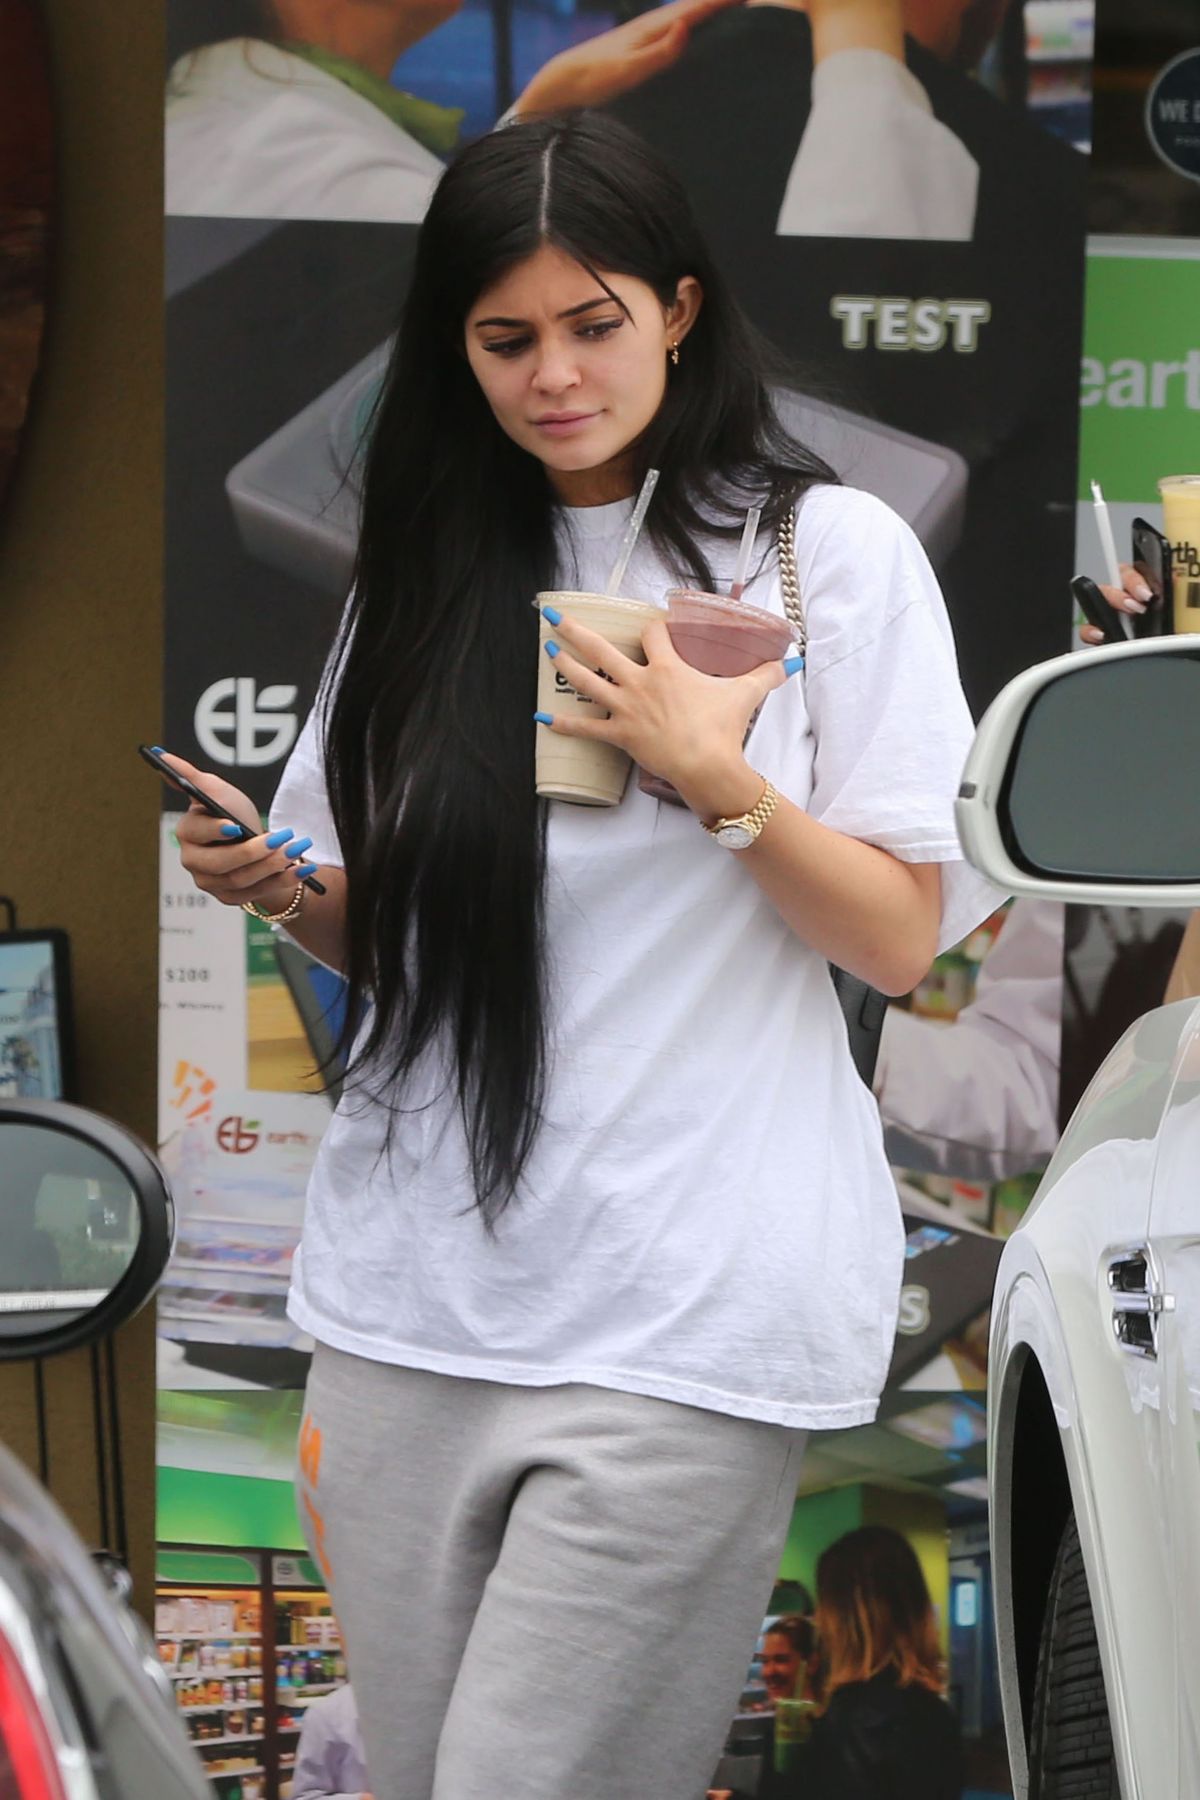 KYLIE JENNER Leaves Earth Bar in West Hollywood 06/08/2017 – HawtCelebs